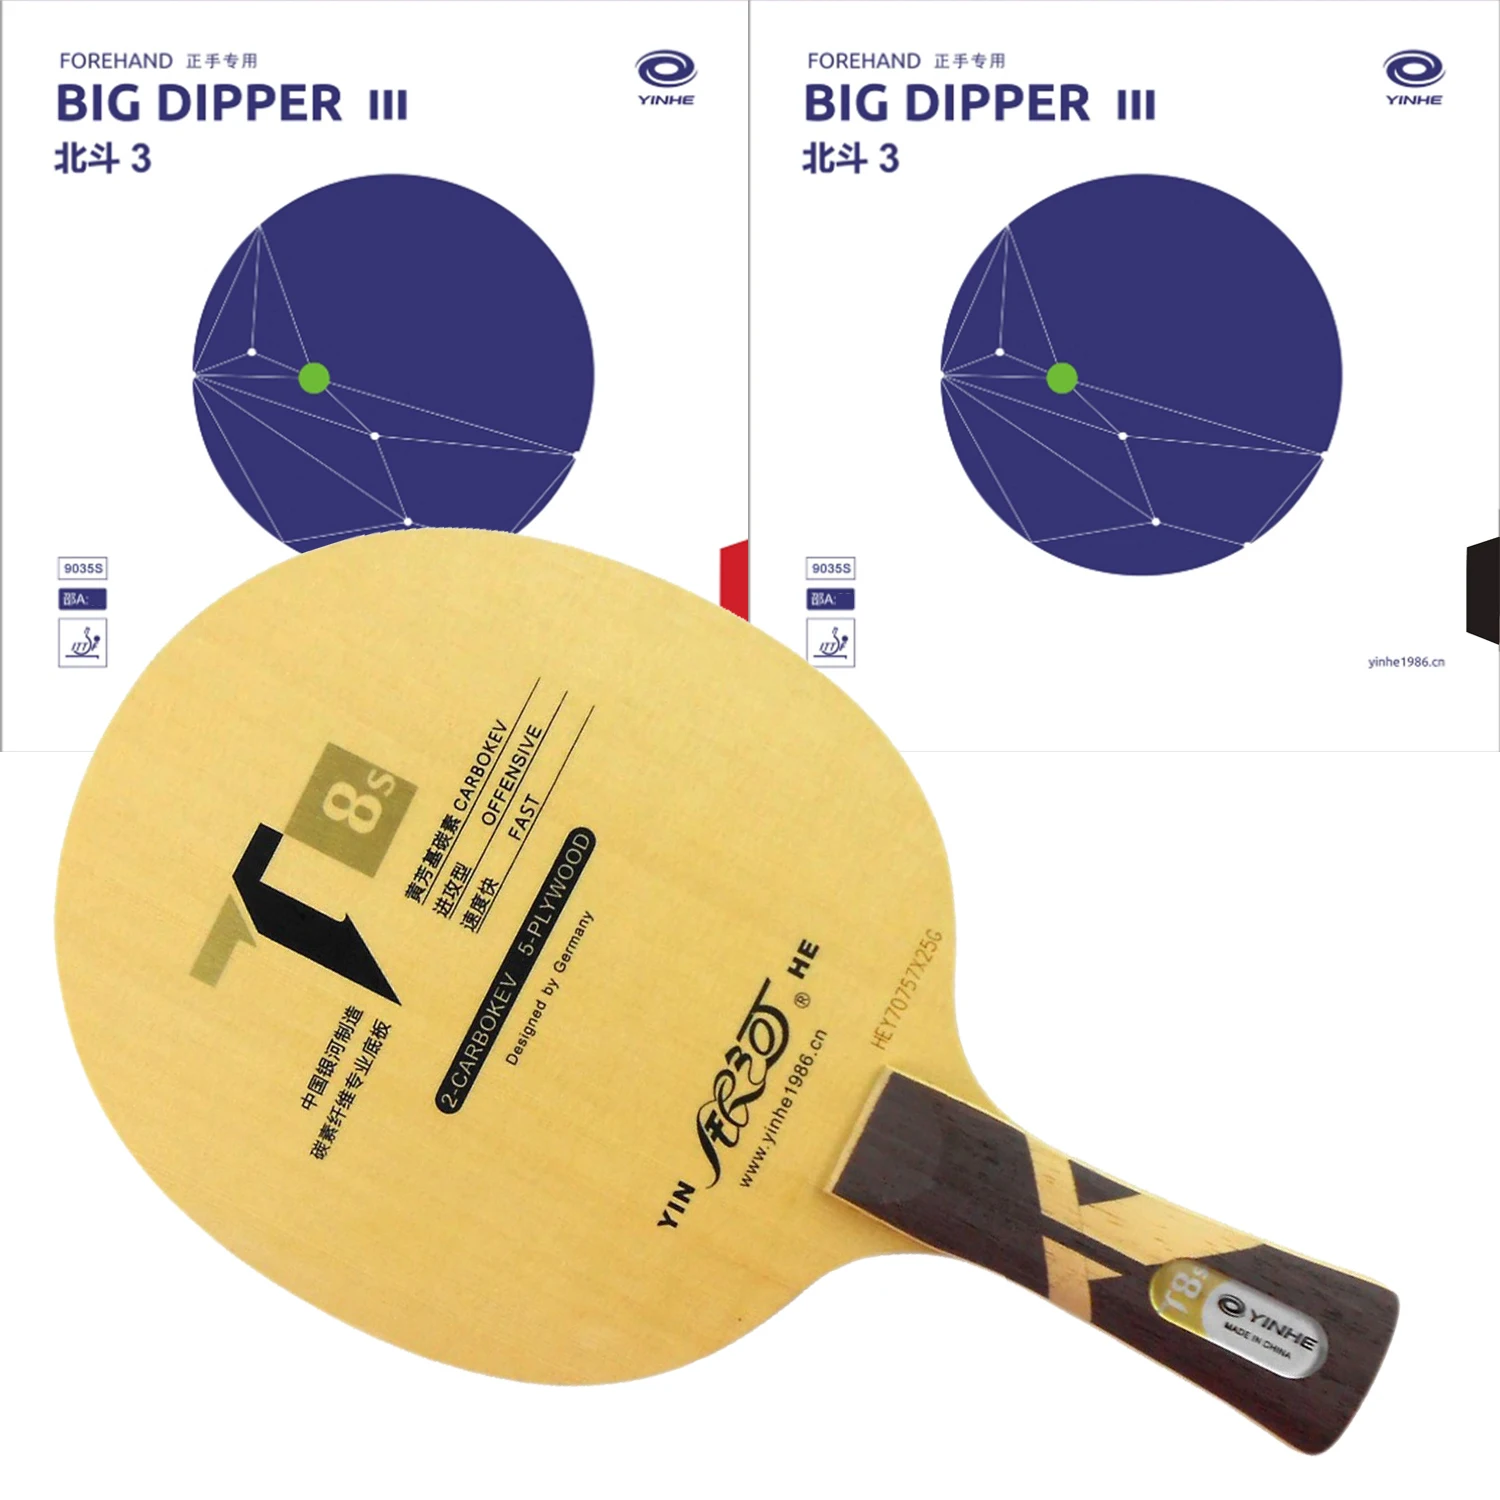 Pro Combo Racket YINHE T8s table tennis balde with 2Pieces Yinhe Big Dipper 3 Big DipperIII  Pips-in PingPong Rubber